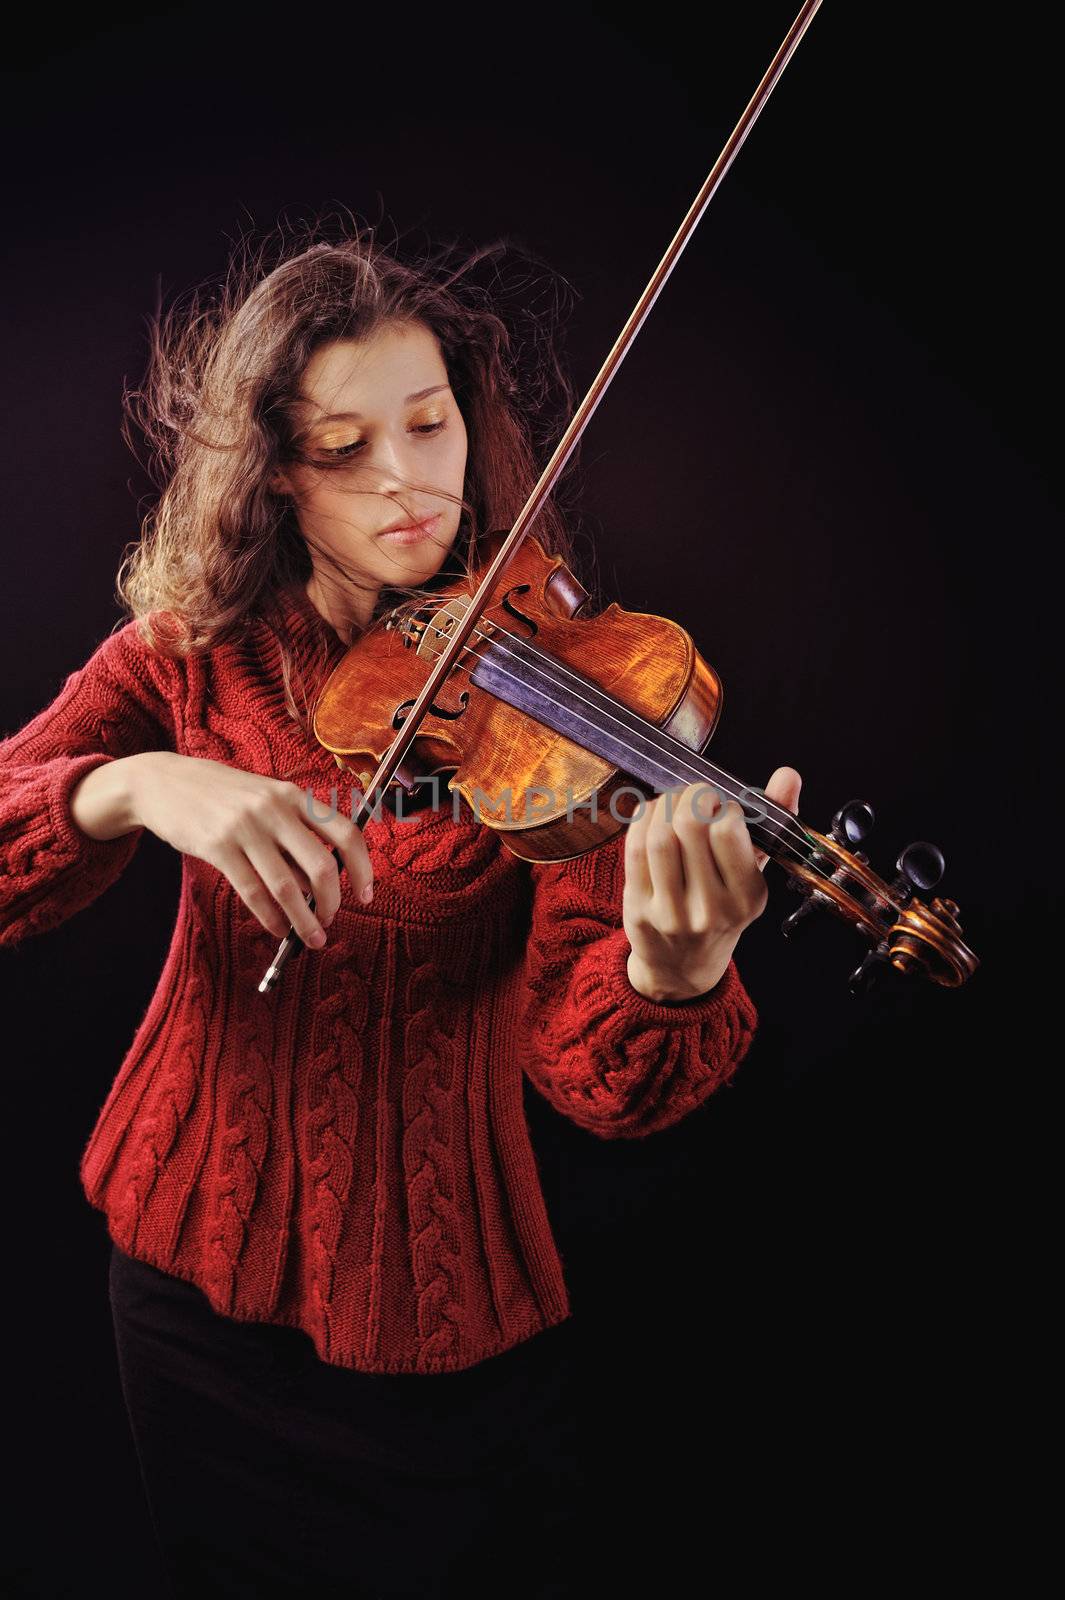 Young woman playing a violin with expression